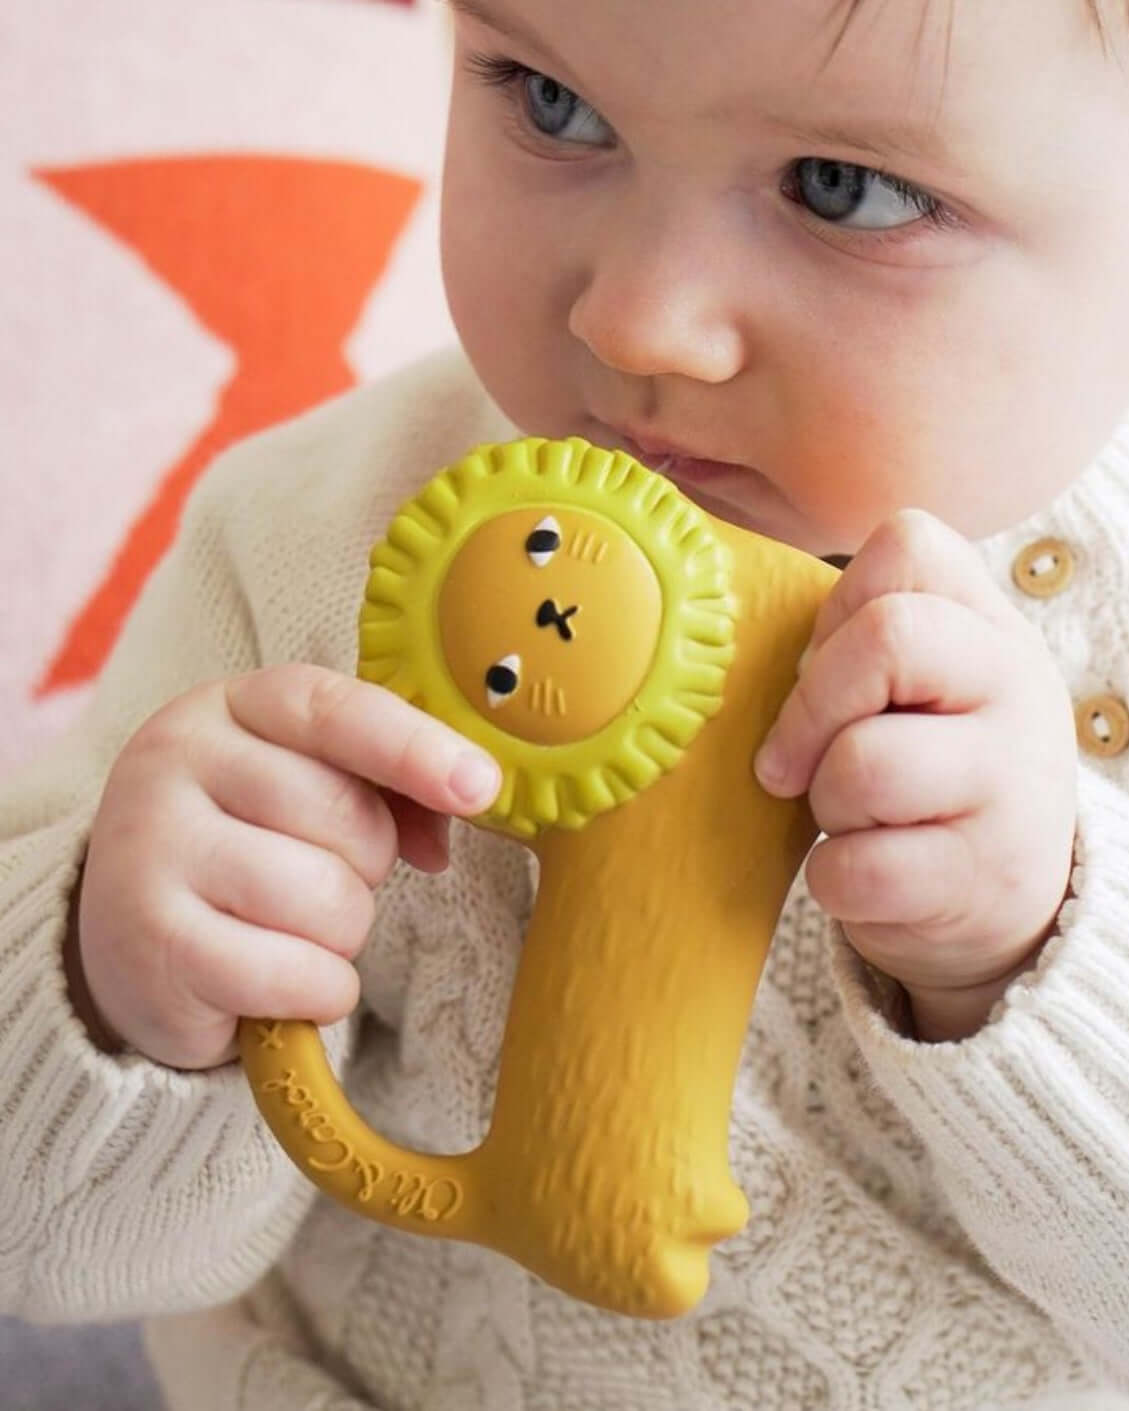 Donna Wilson Natural Rubber Richie Lion Baby Teether